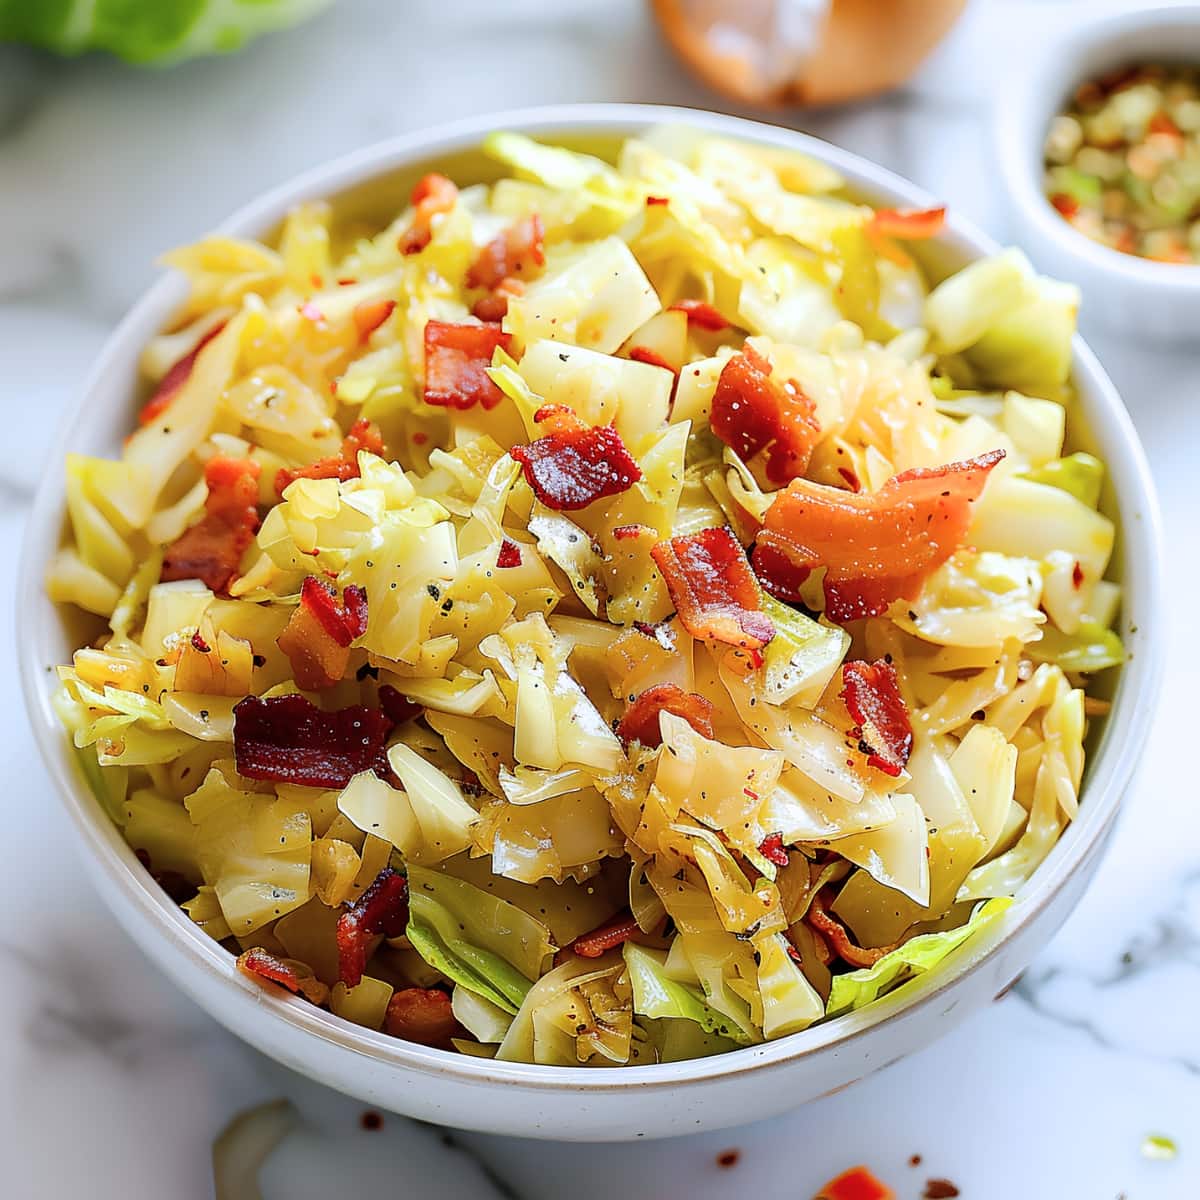 Homemade cabbage salad with bacon, a comforting dish